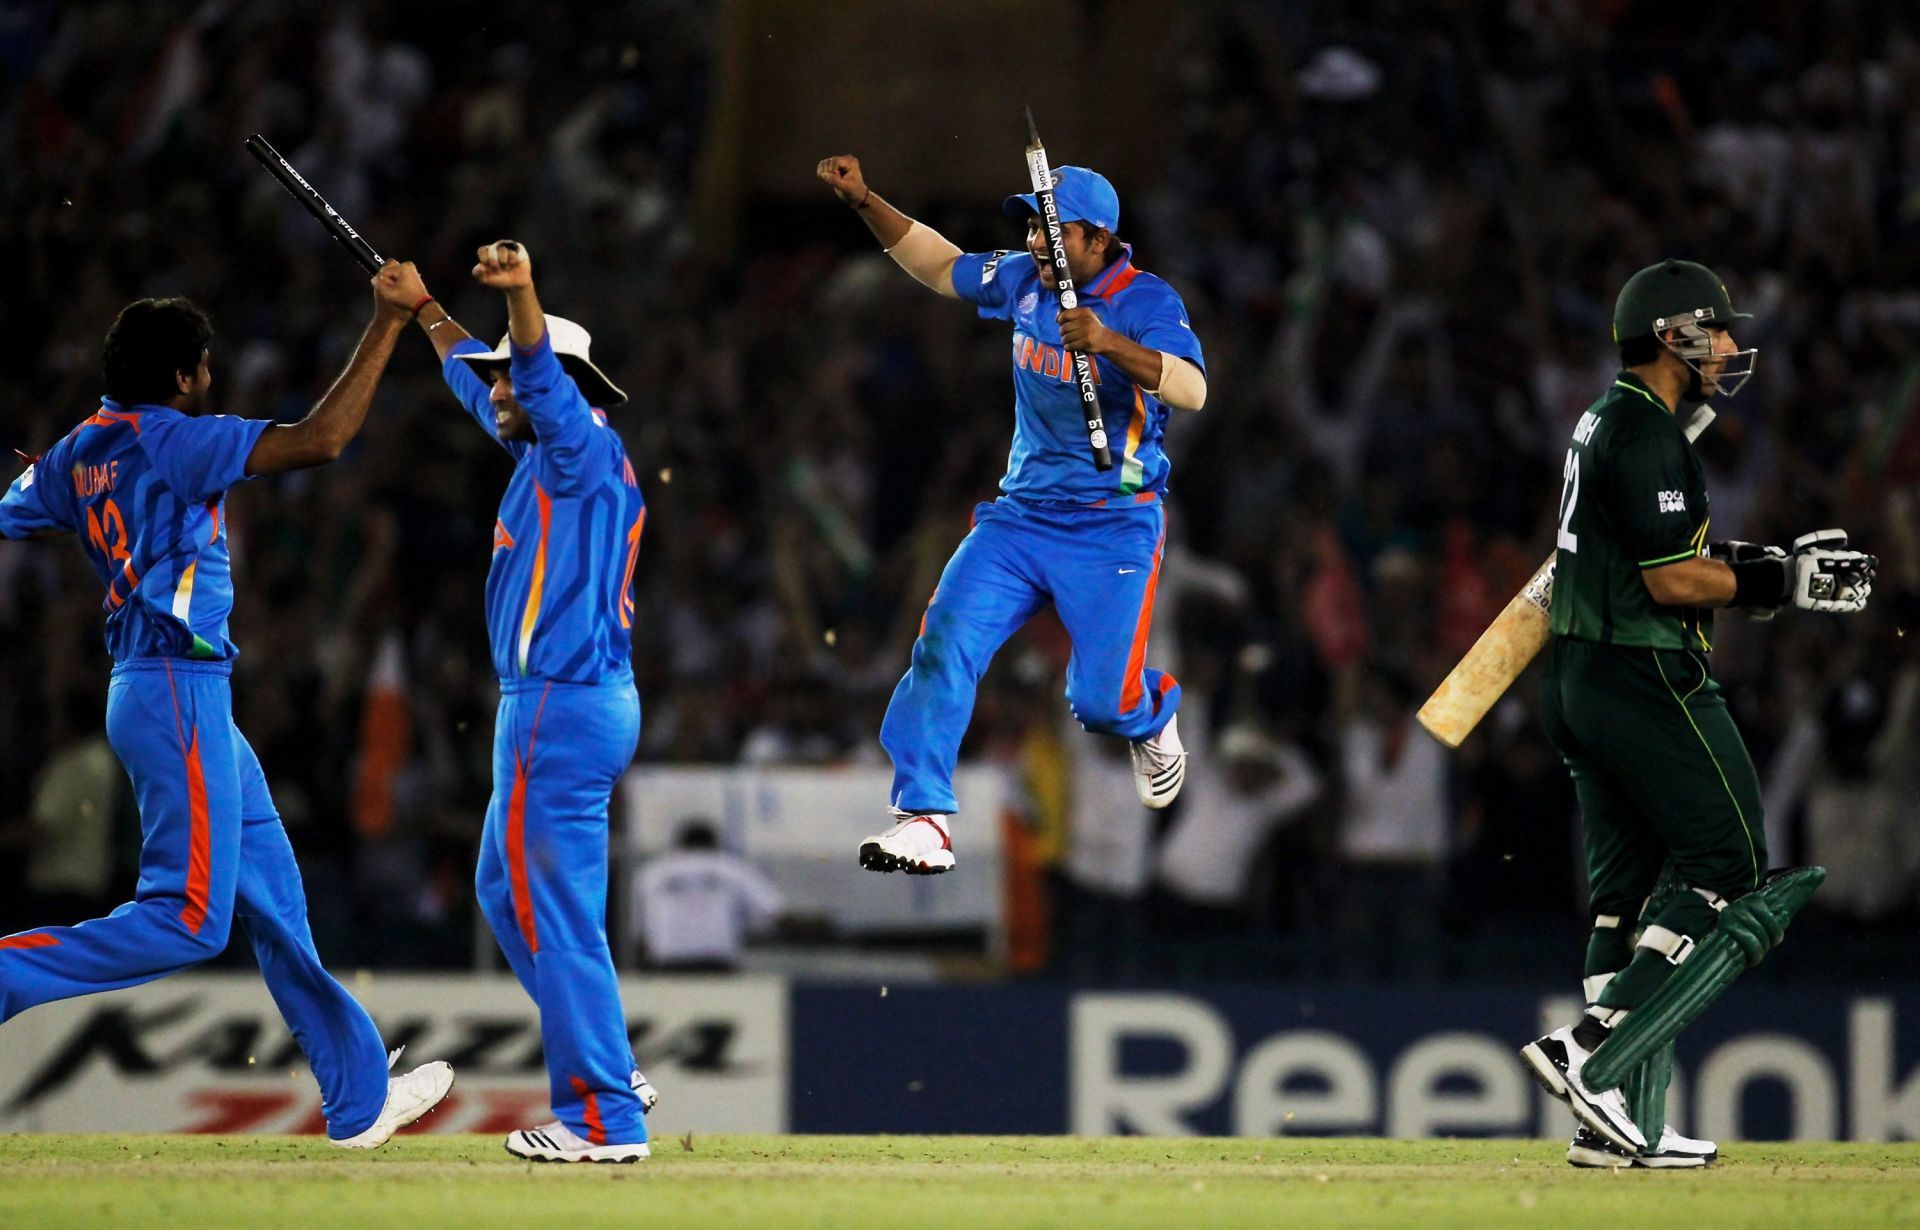 India defeated Pakistan by 29 runs in the 2011 World Cup semi-final.